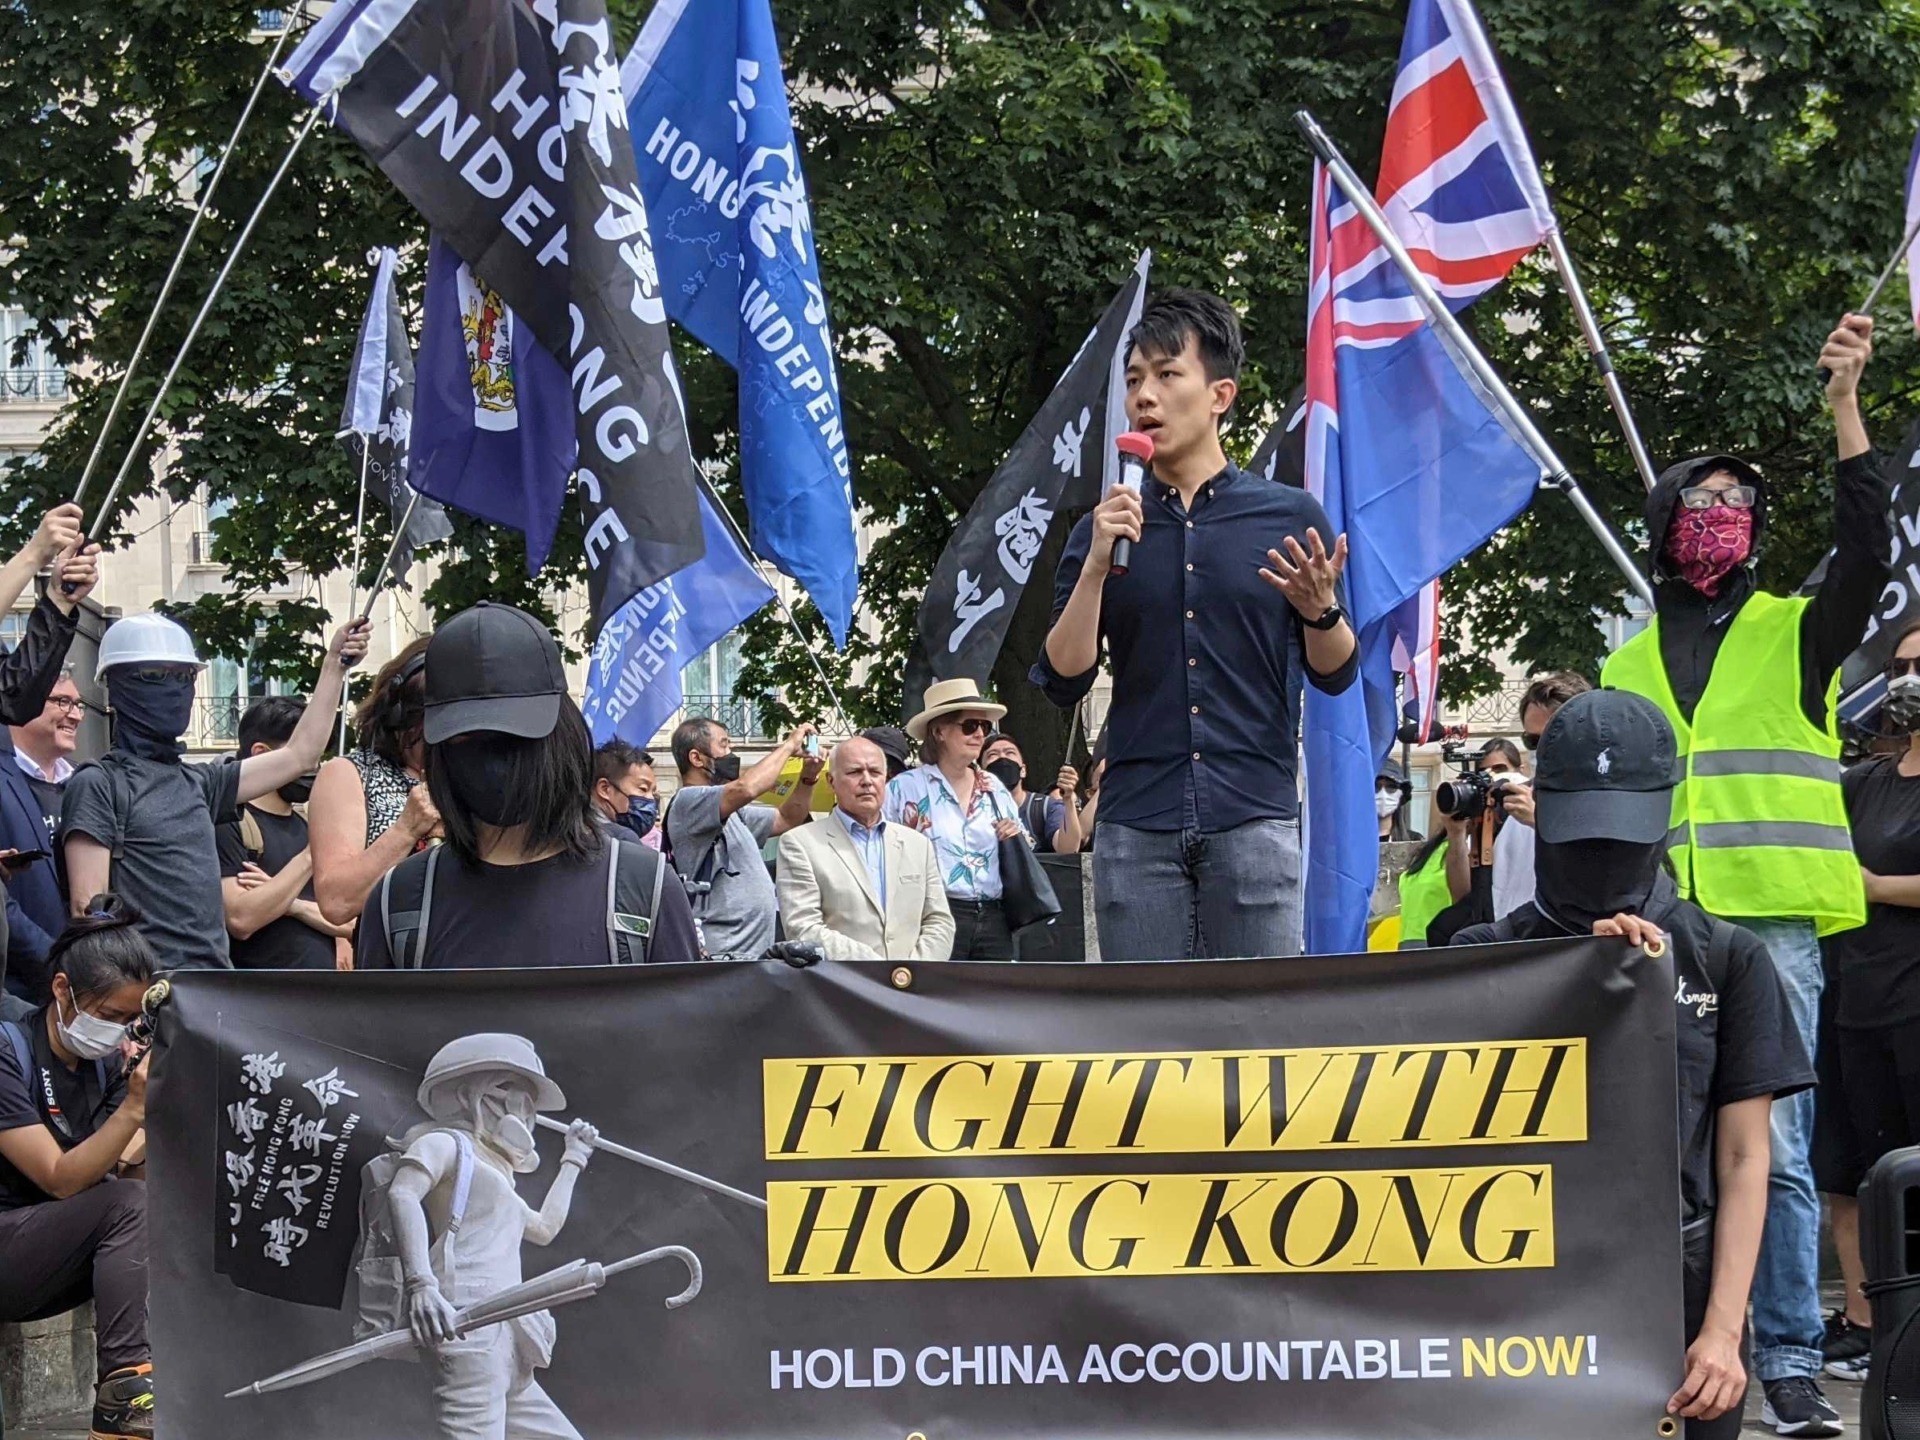 Hong Kong activist Finn Lau, who is living in exile in the UK, addressed the protest at Marble Arch in London. June 12th, 2021. Kurt Zindulka, Breitbart News